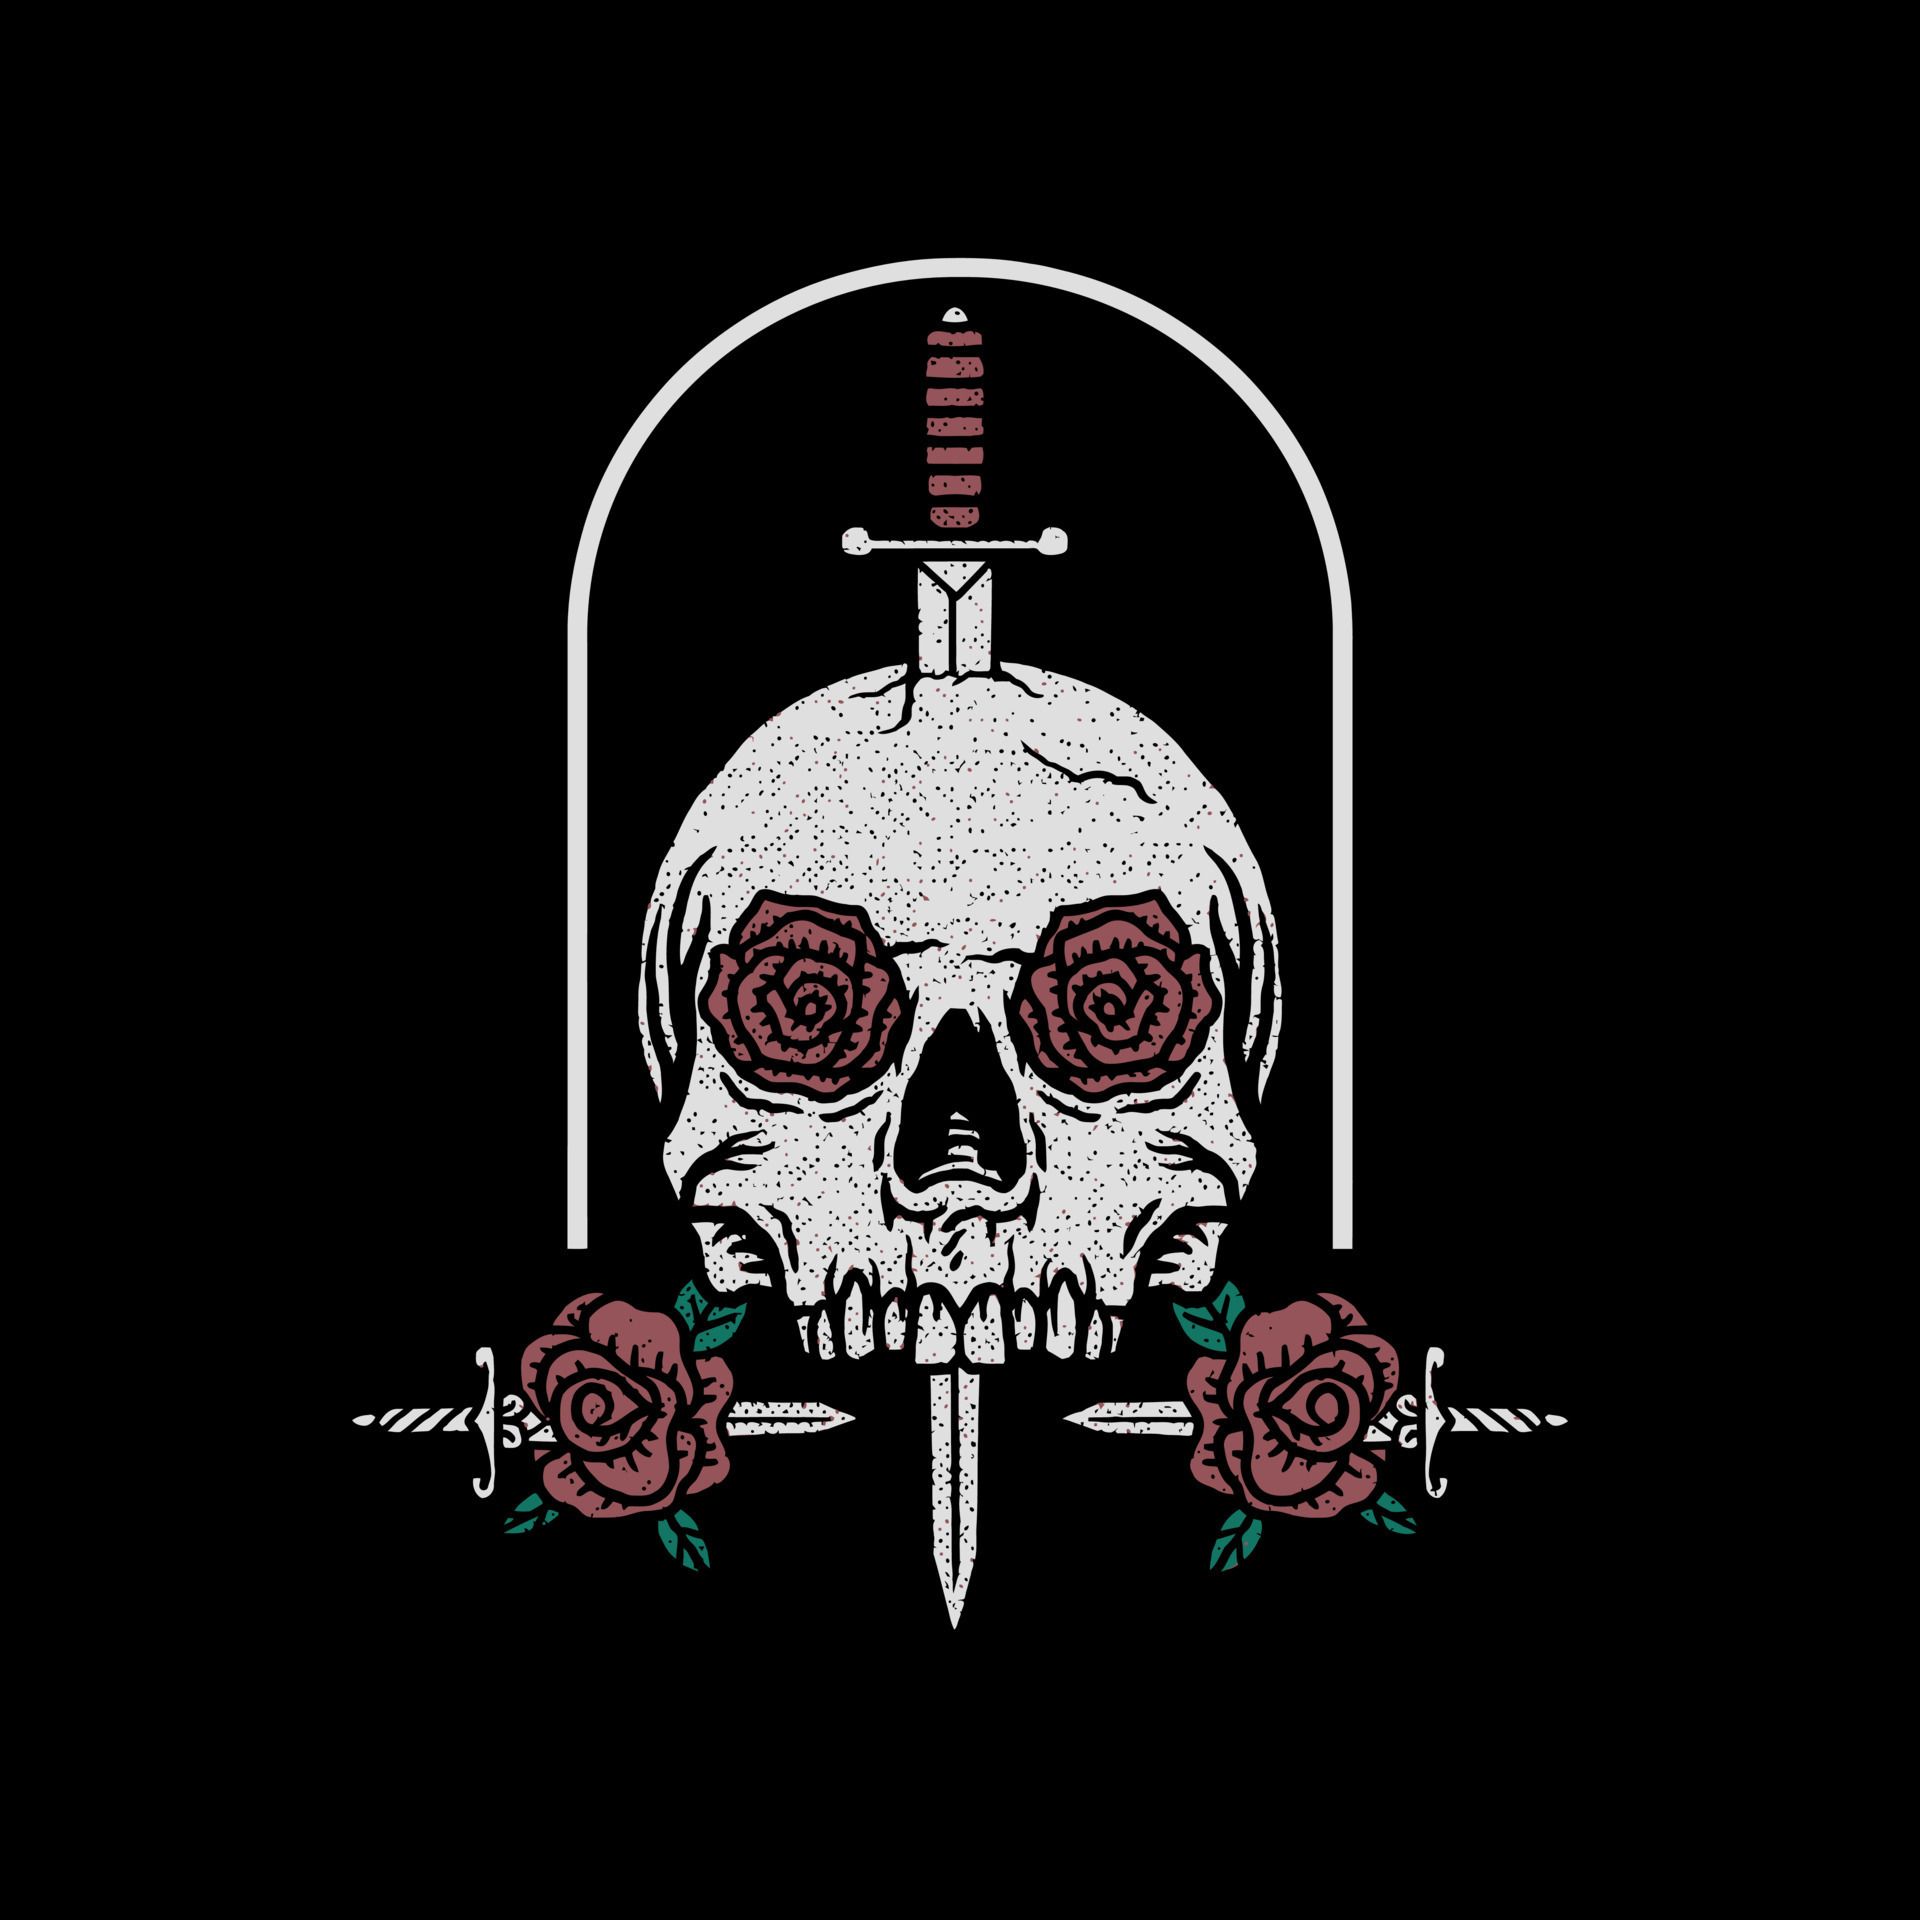 Sword through a skull with a knife and roses